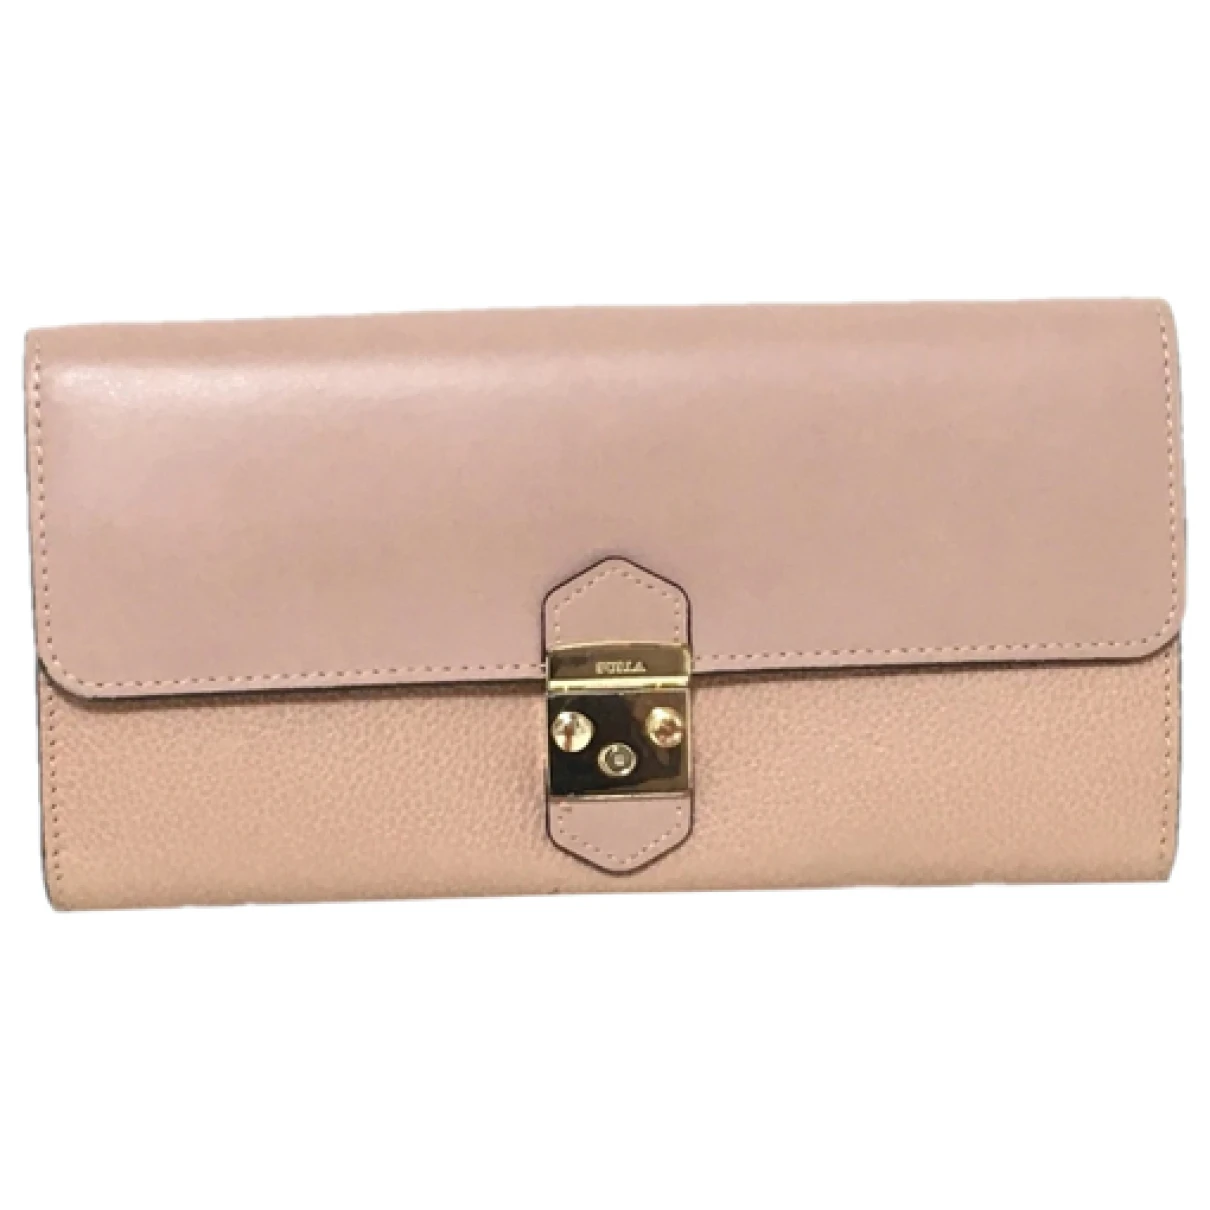 Pre-owned Furla Leather Wallet In Pink